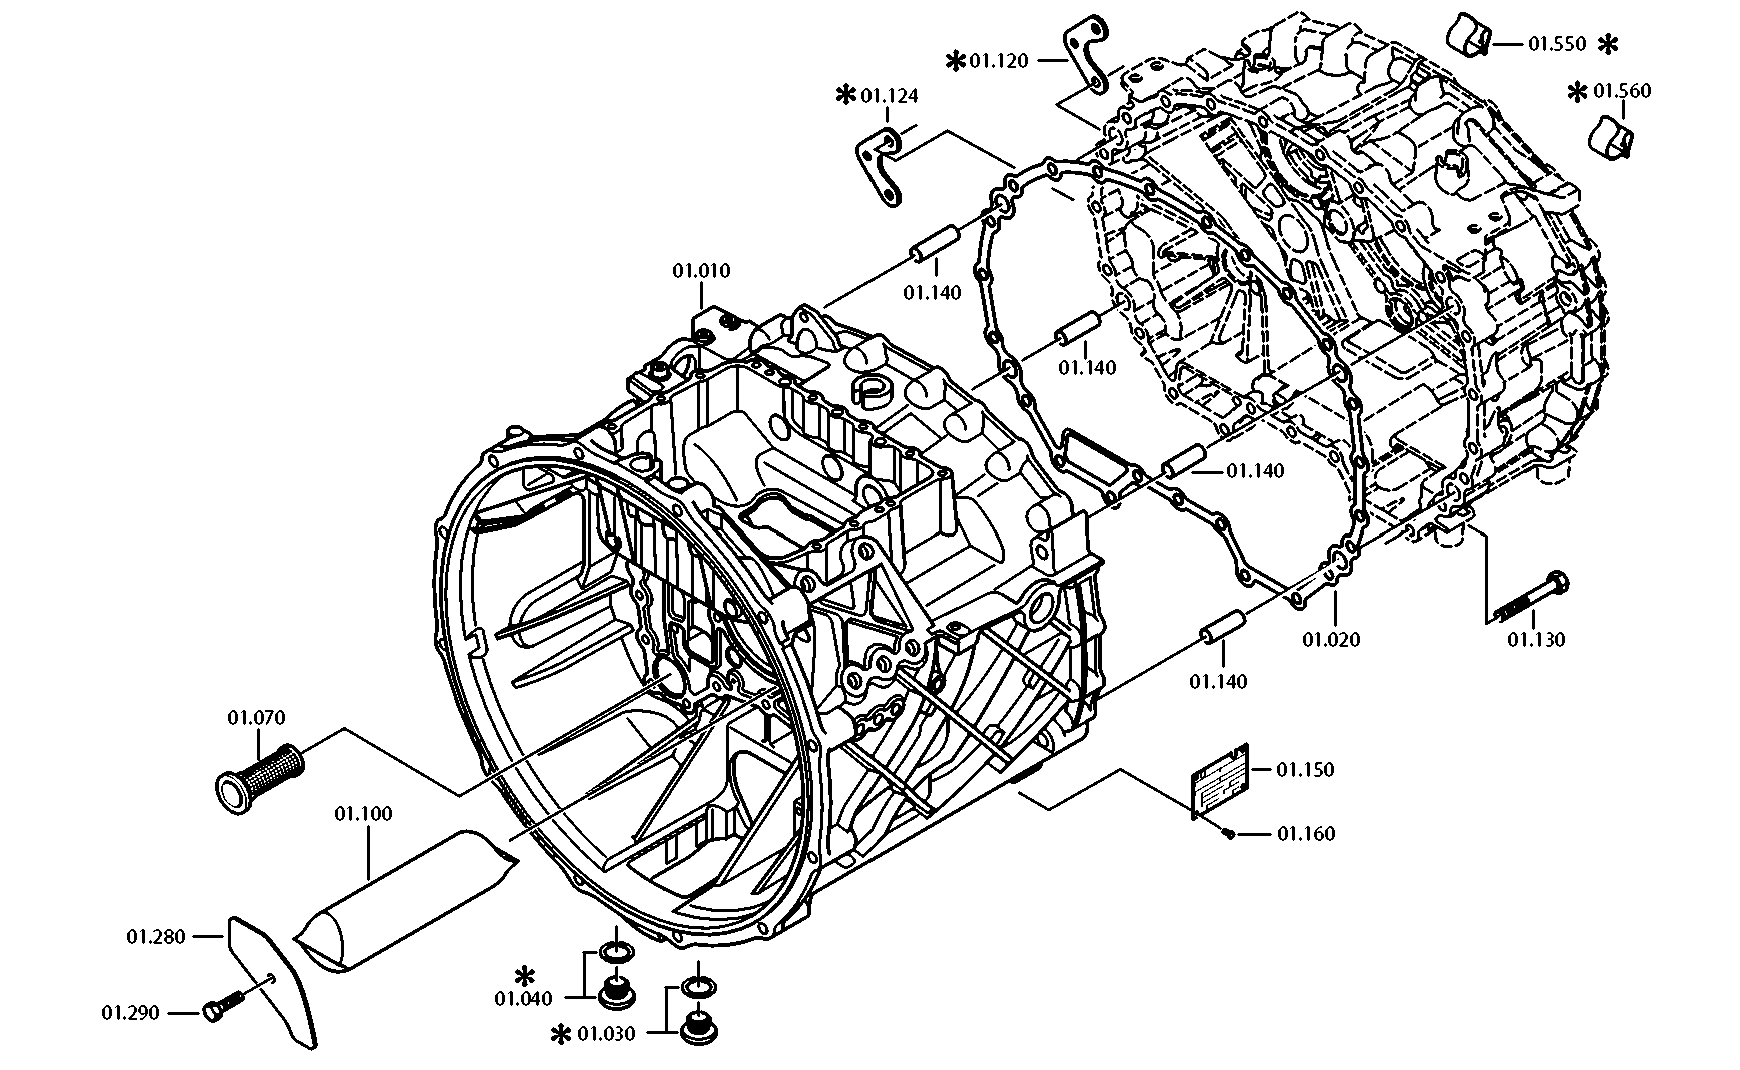 drawing for DAF 689417 - SPEEDO.CONN. (figure 4)